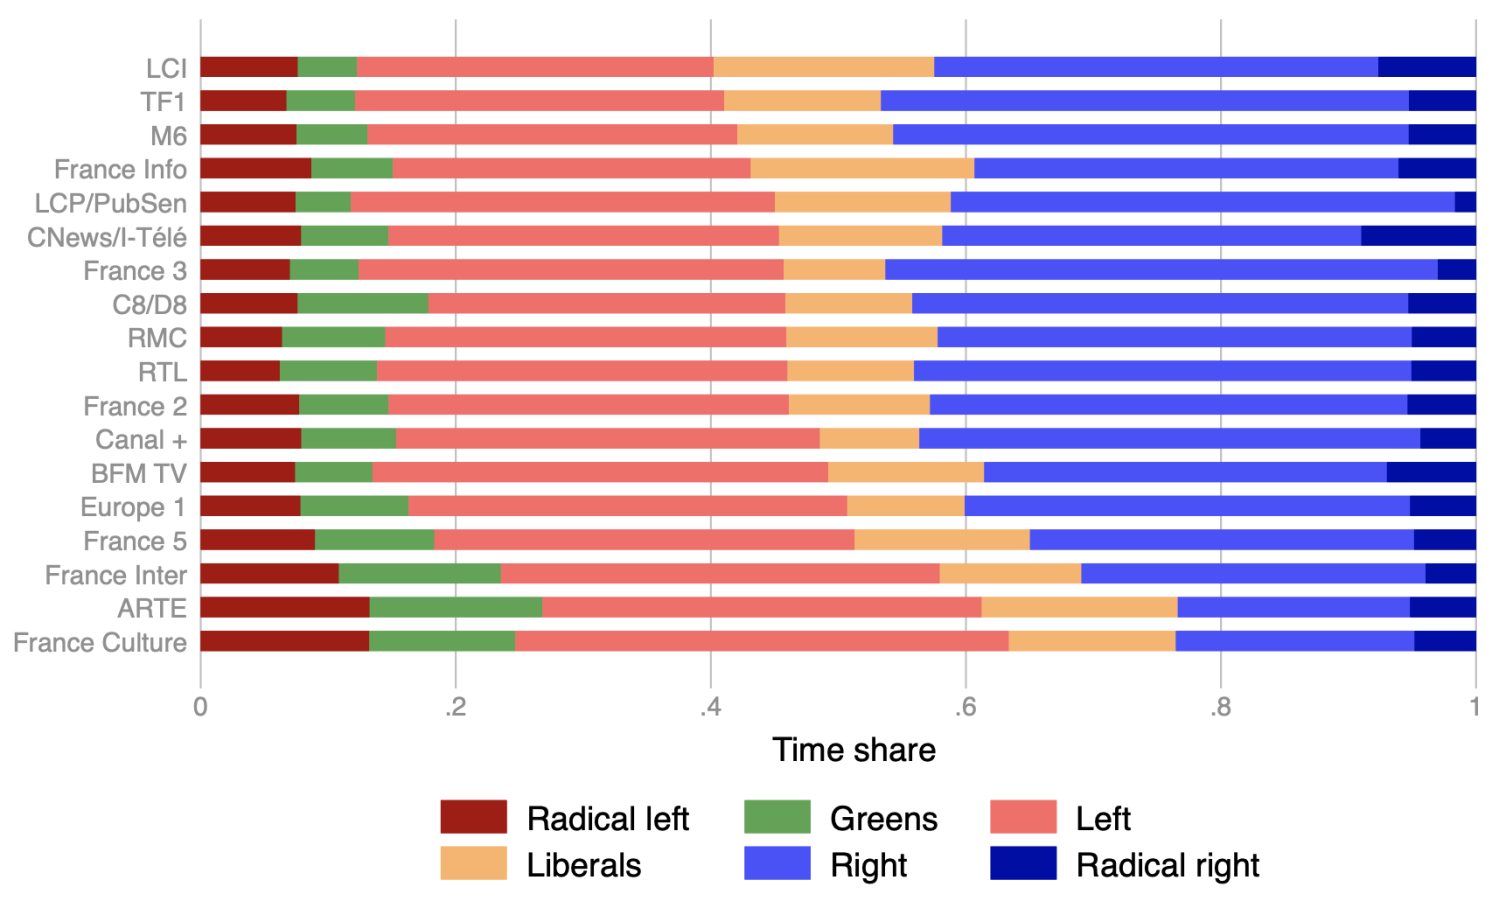 Figure 1 Speaking-time share devoted to different political groups depending on the media outlet